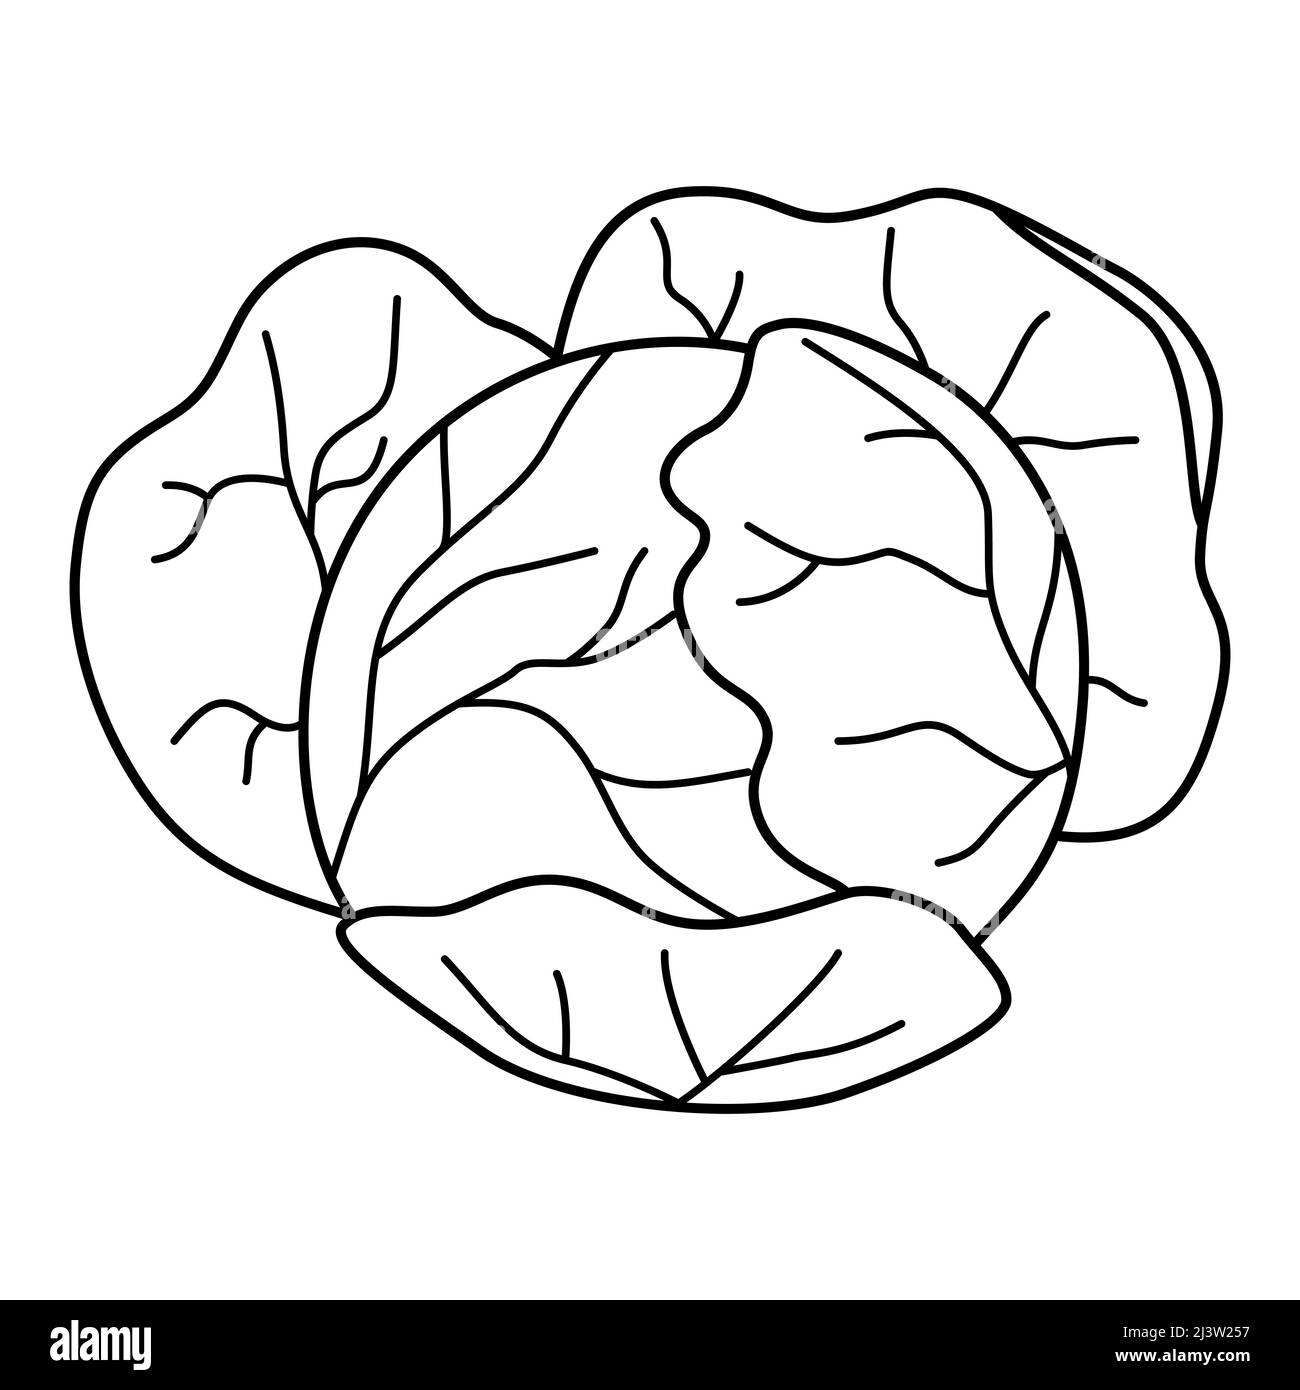 Cabbage head in cartoon style. Black and white vector illustration for coloring book Stock Vector